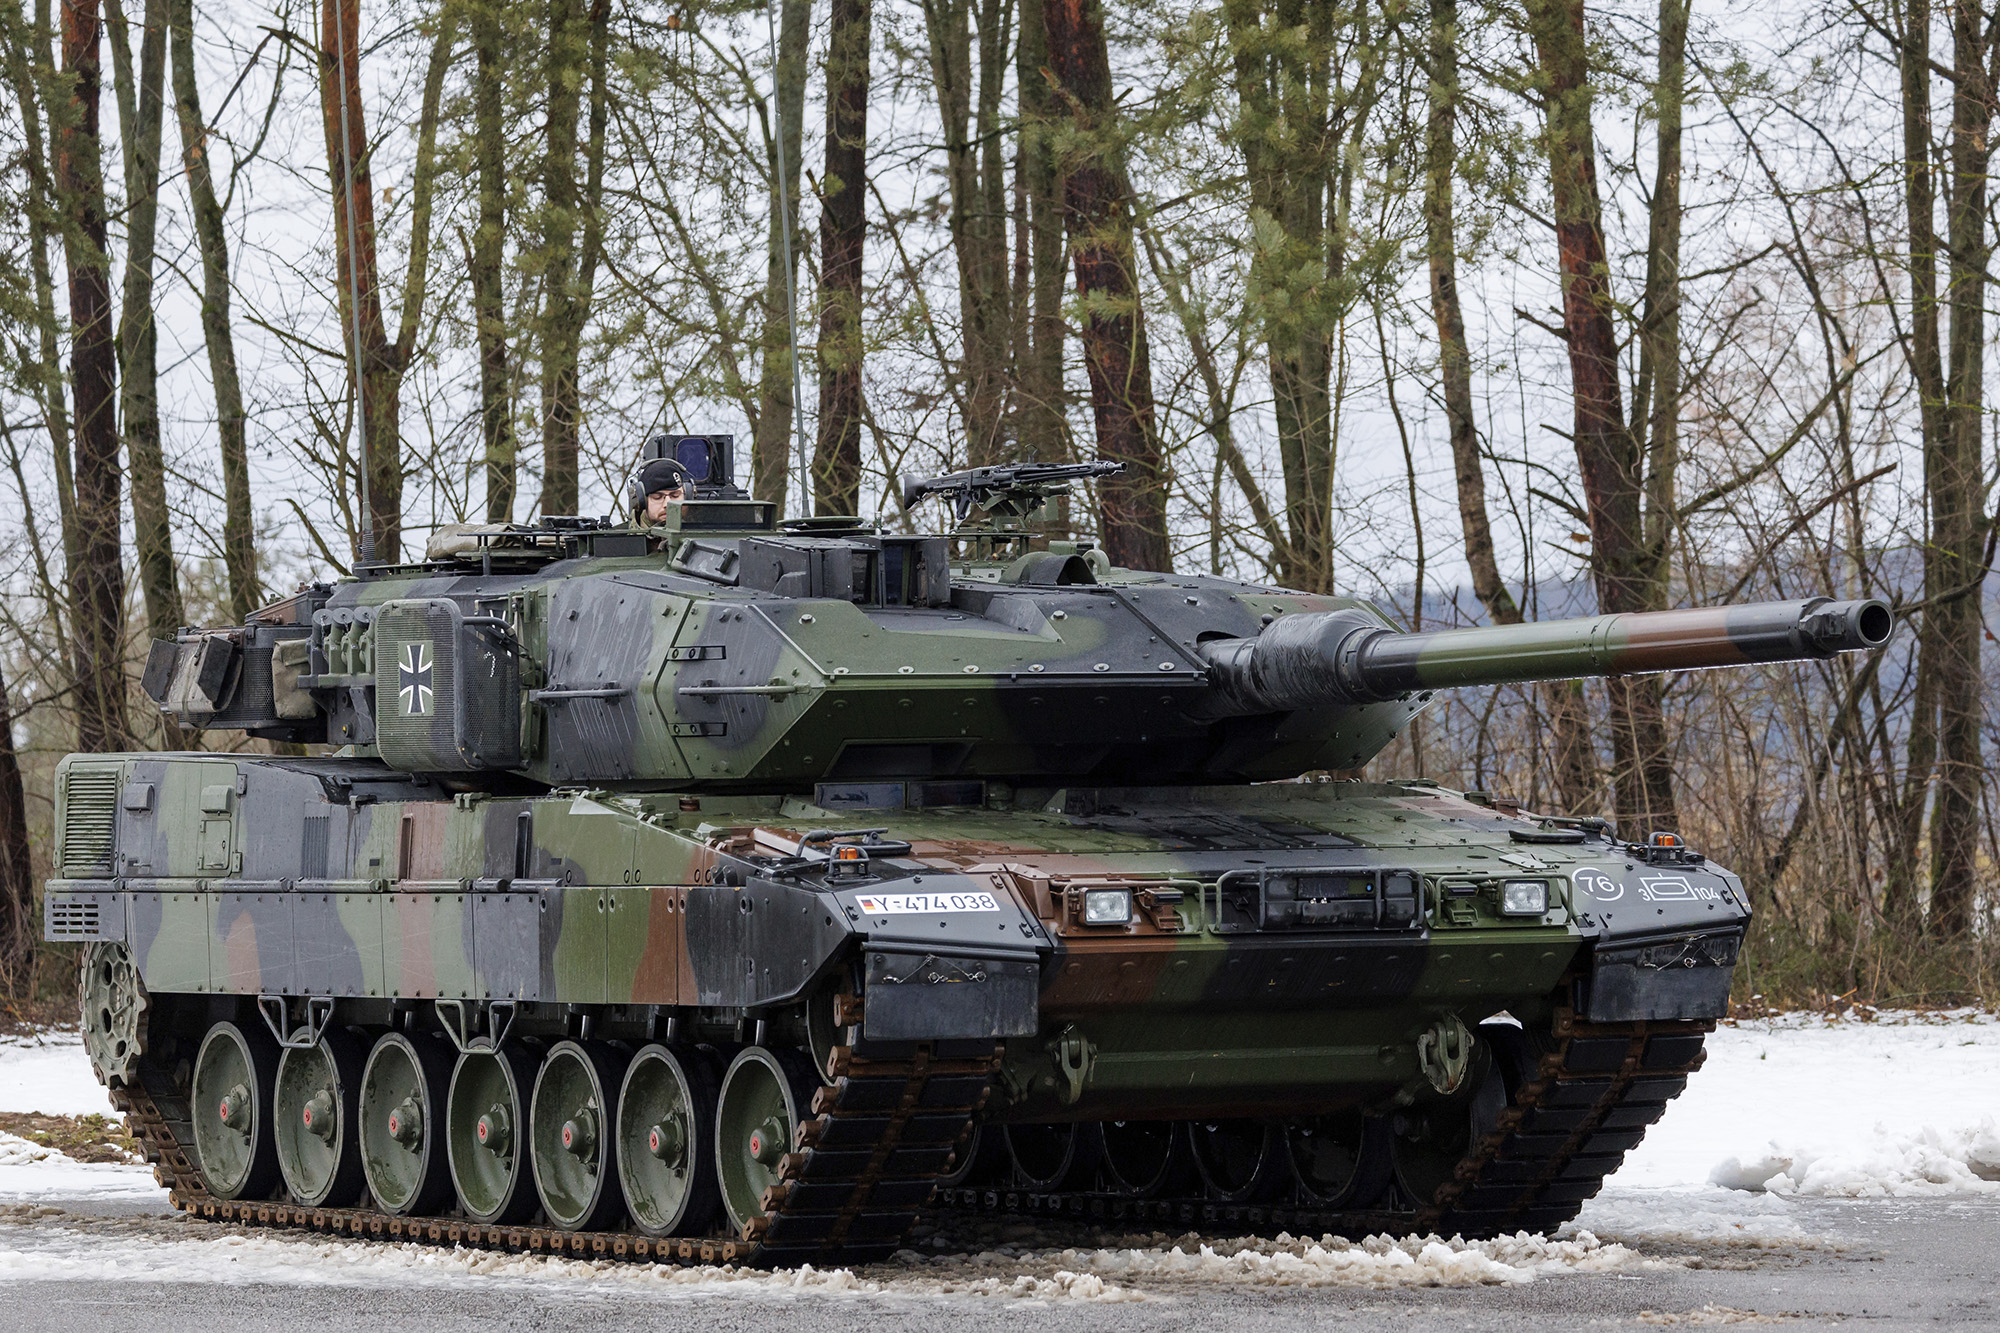 A German Leopard 2 A7V tank stands on the barracks grounds in Pfreimd, Germany, on February 3.